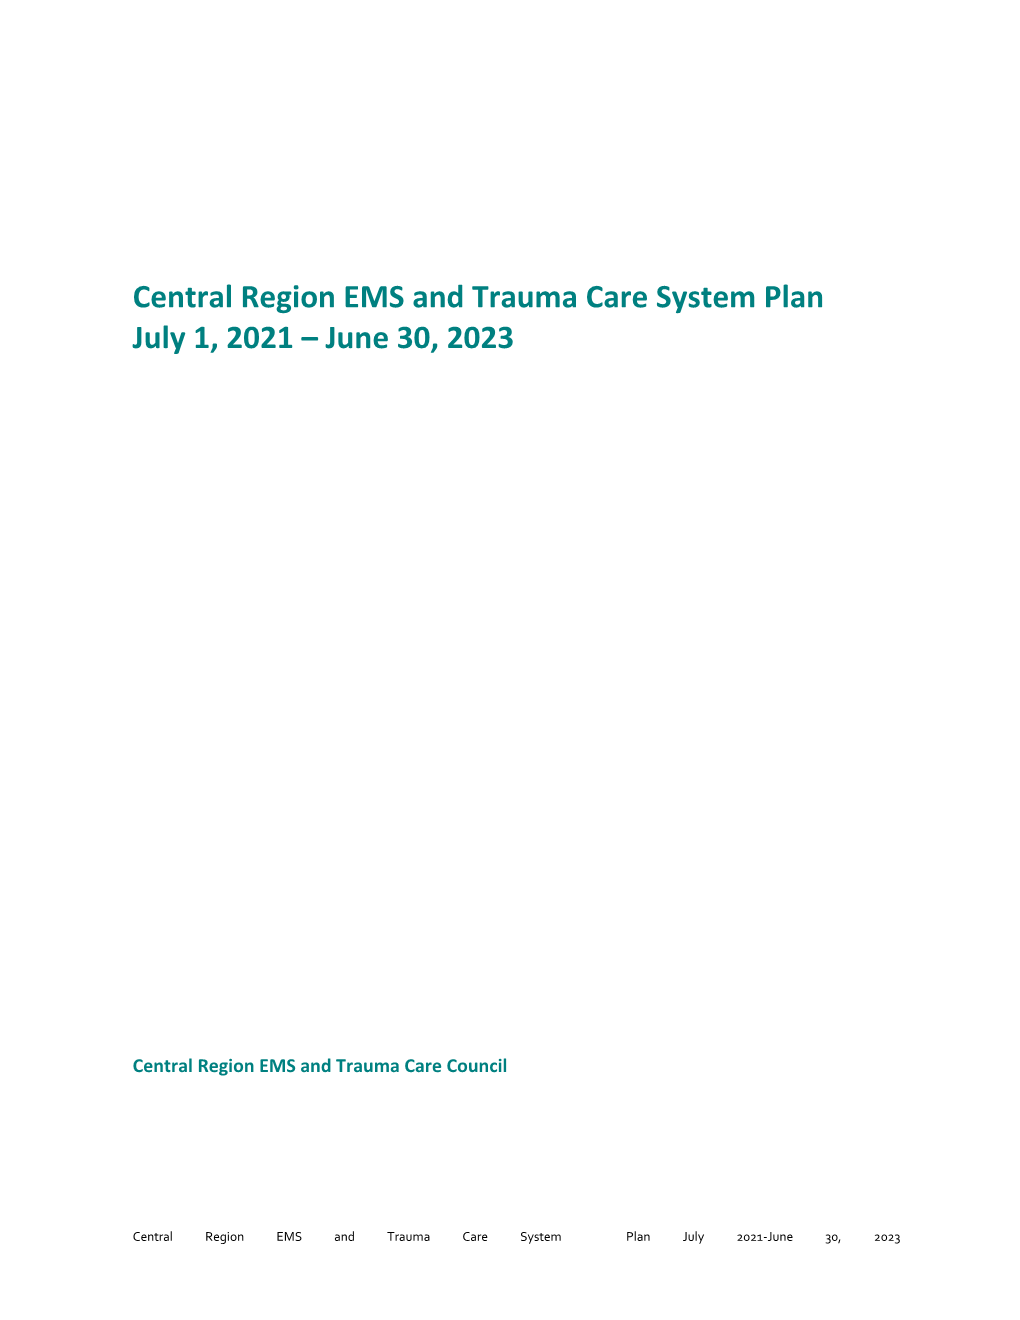 Central Region EMS and Trauma Care System Plan July 1, 2021 – June 30, 2023